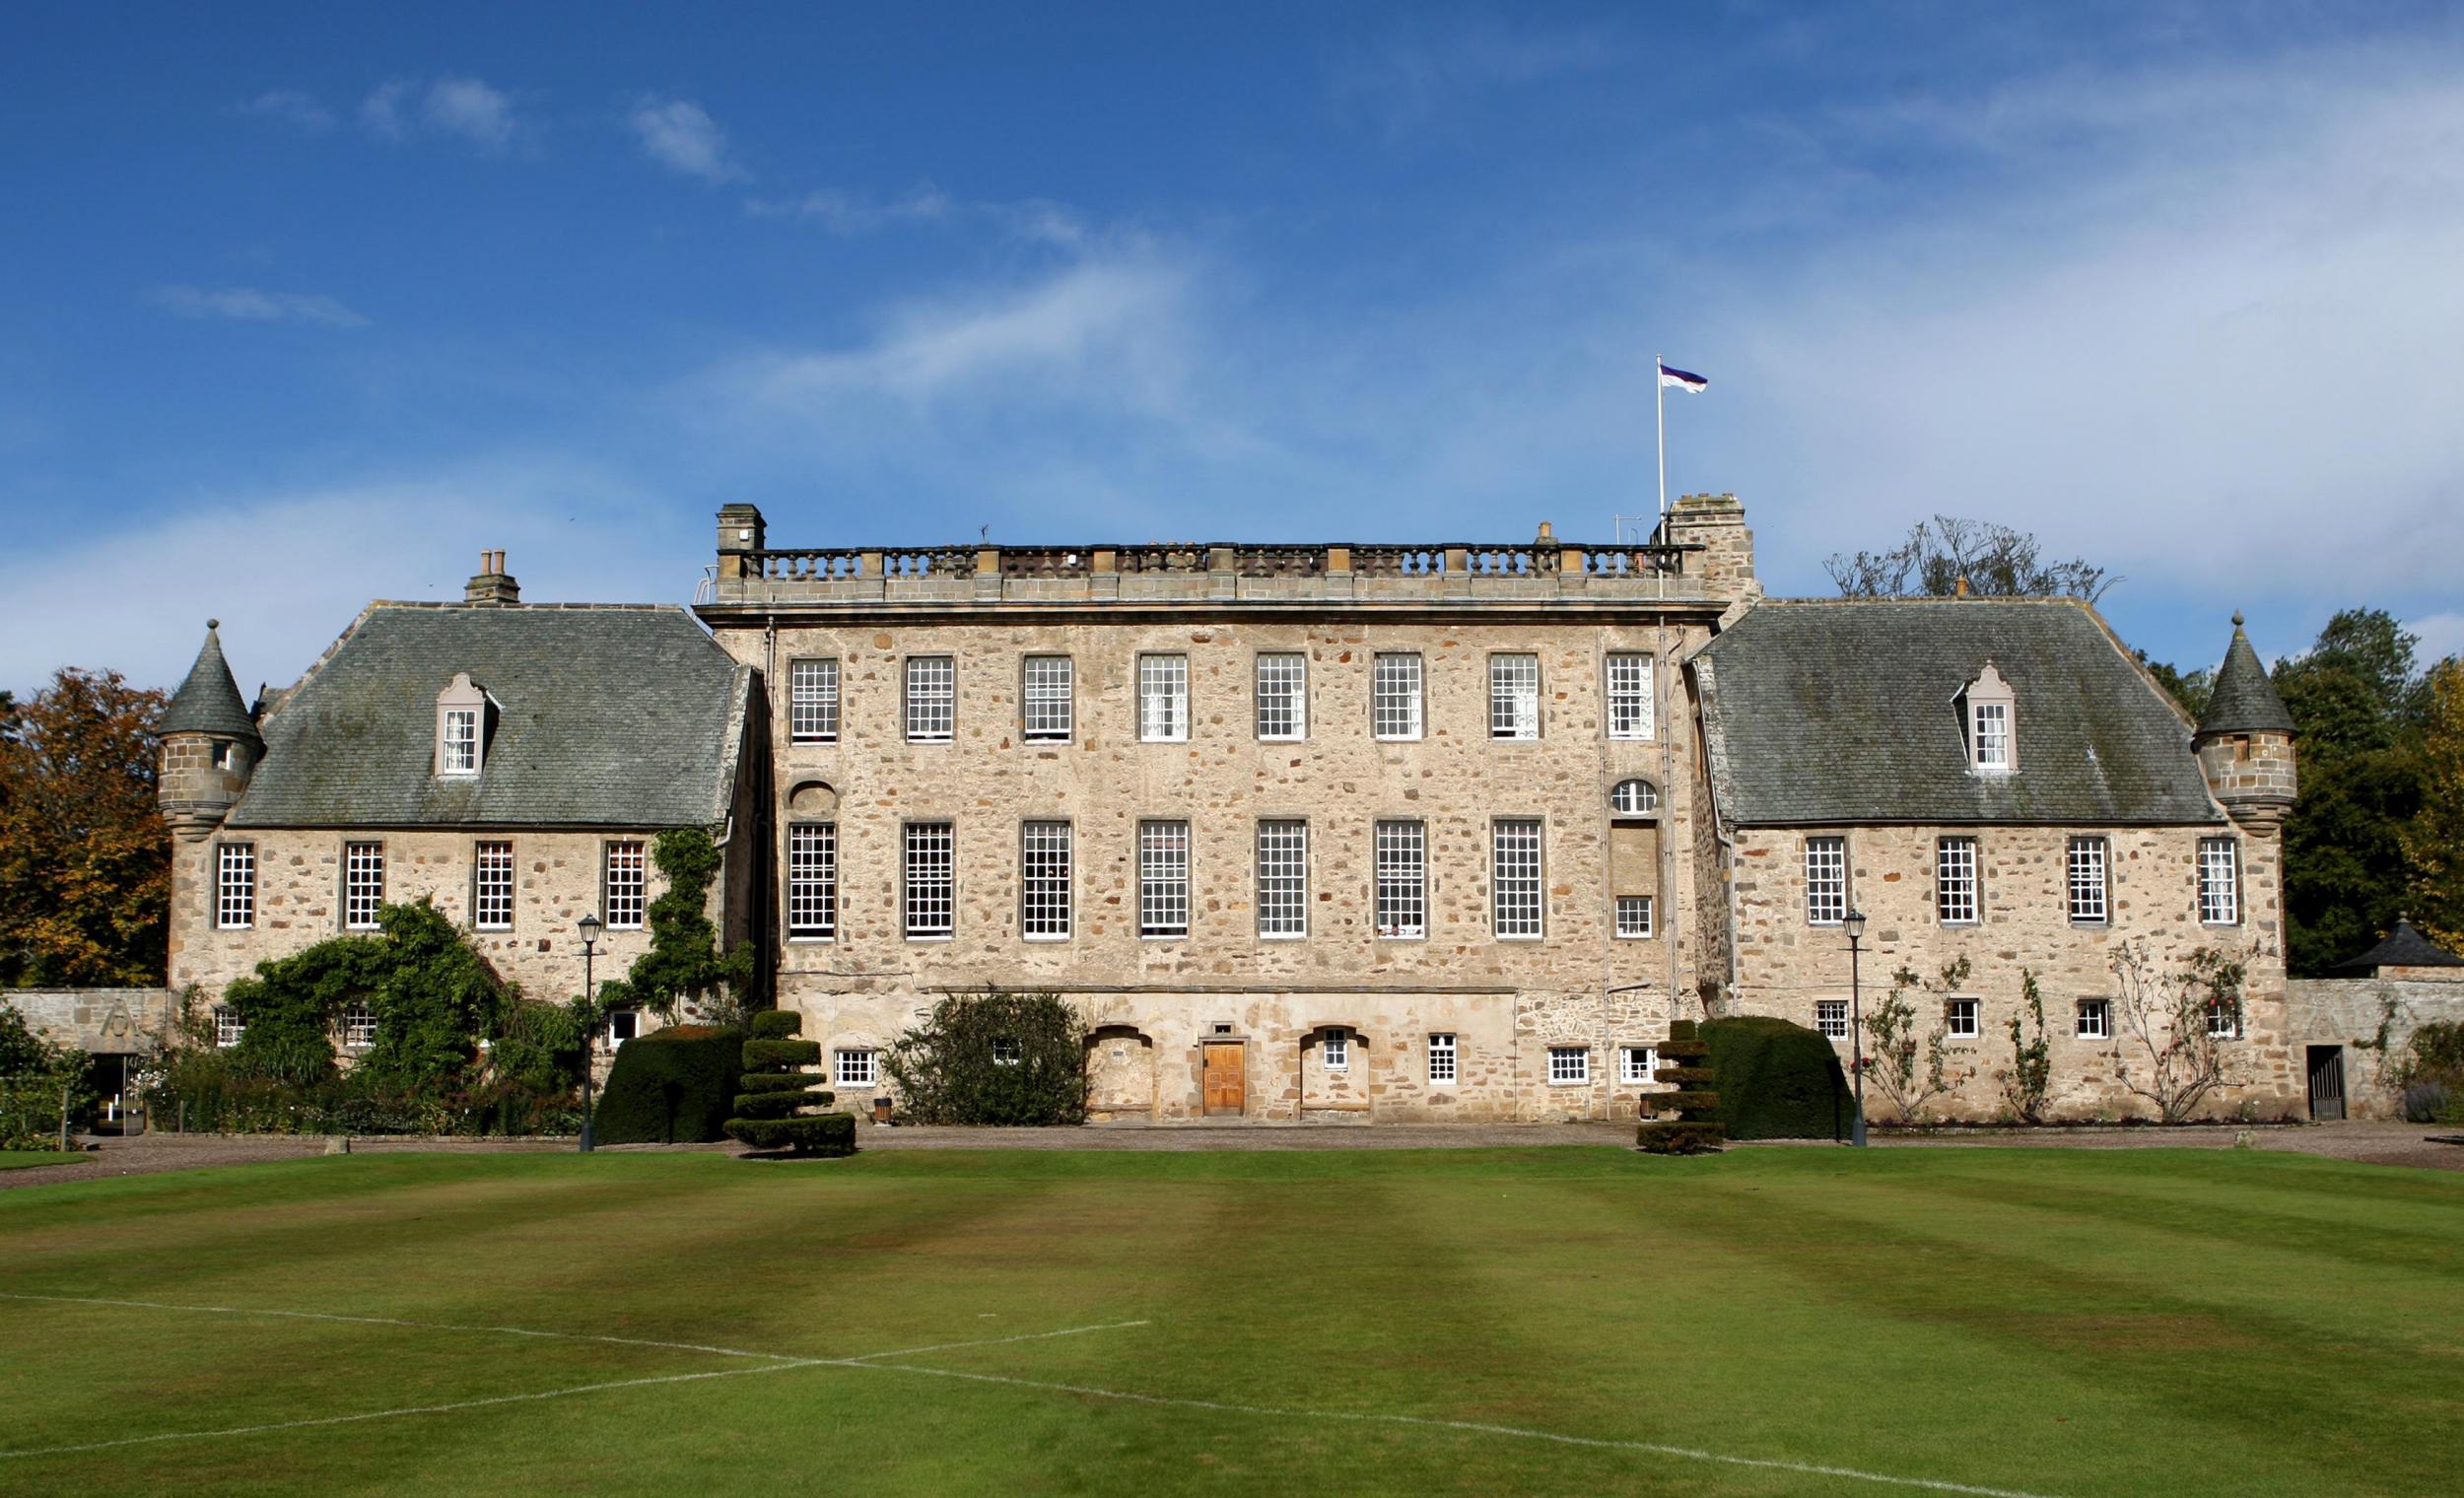 Prince Philip and King Charles both attended Gordonstoun School